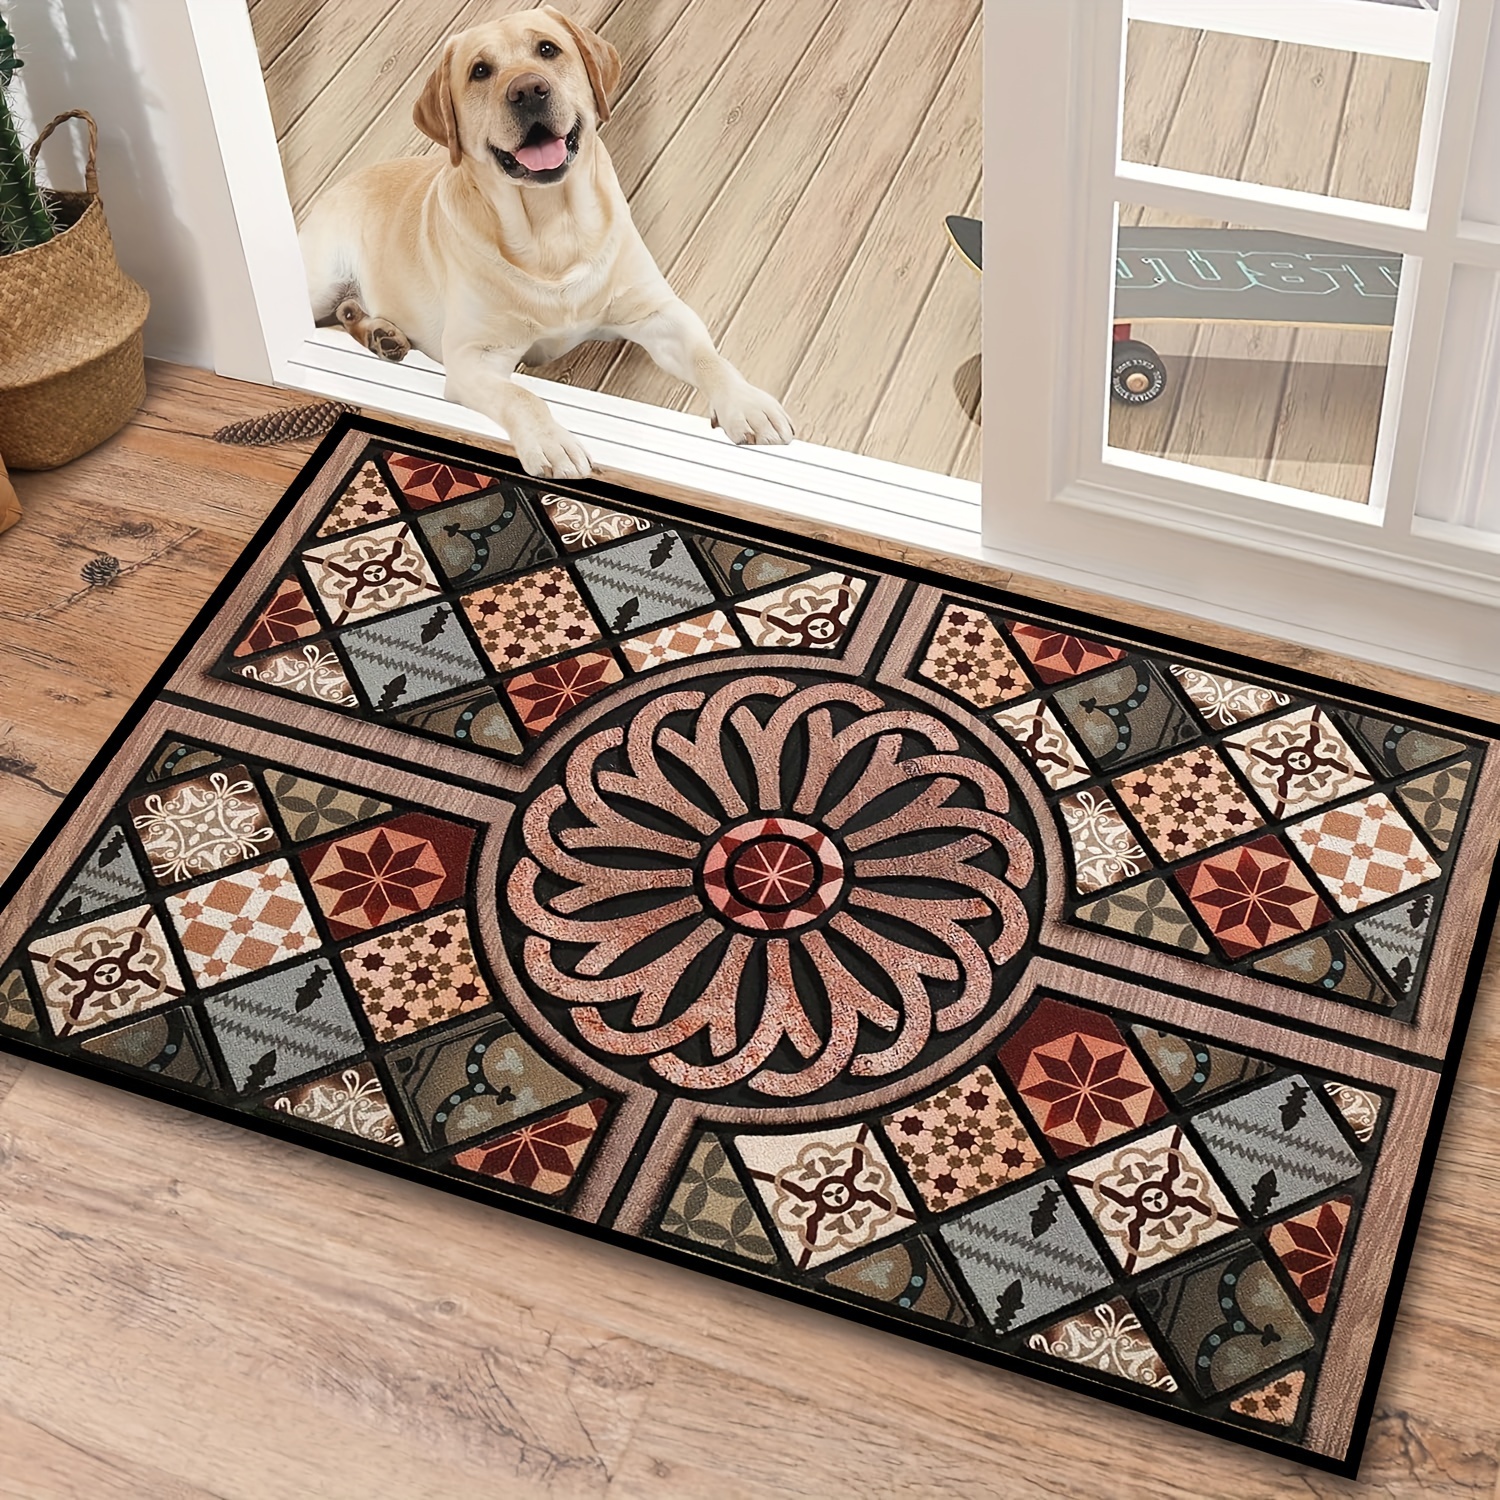 

Welcome Mat Non-slip, Floral Polyester Door Mat, Stain Resistant Entrance Rug, Machine Washable Entryway Carpet For Home, Living Room, Farmhouse, Kitchen, Hallway - Machine Made Polyester Mat.